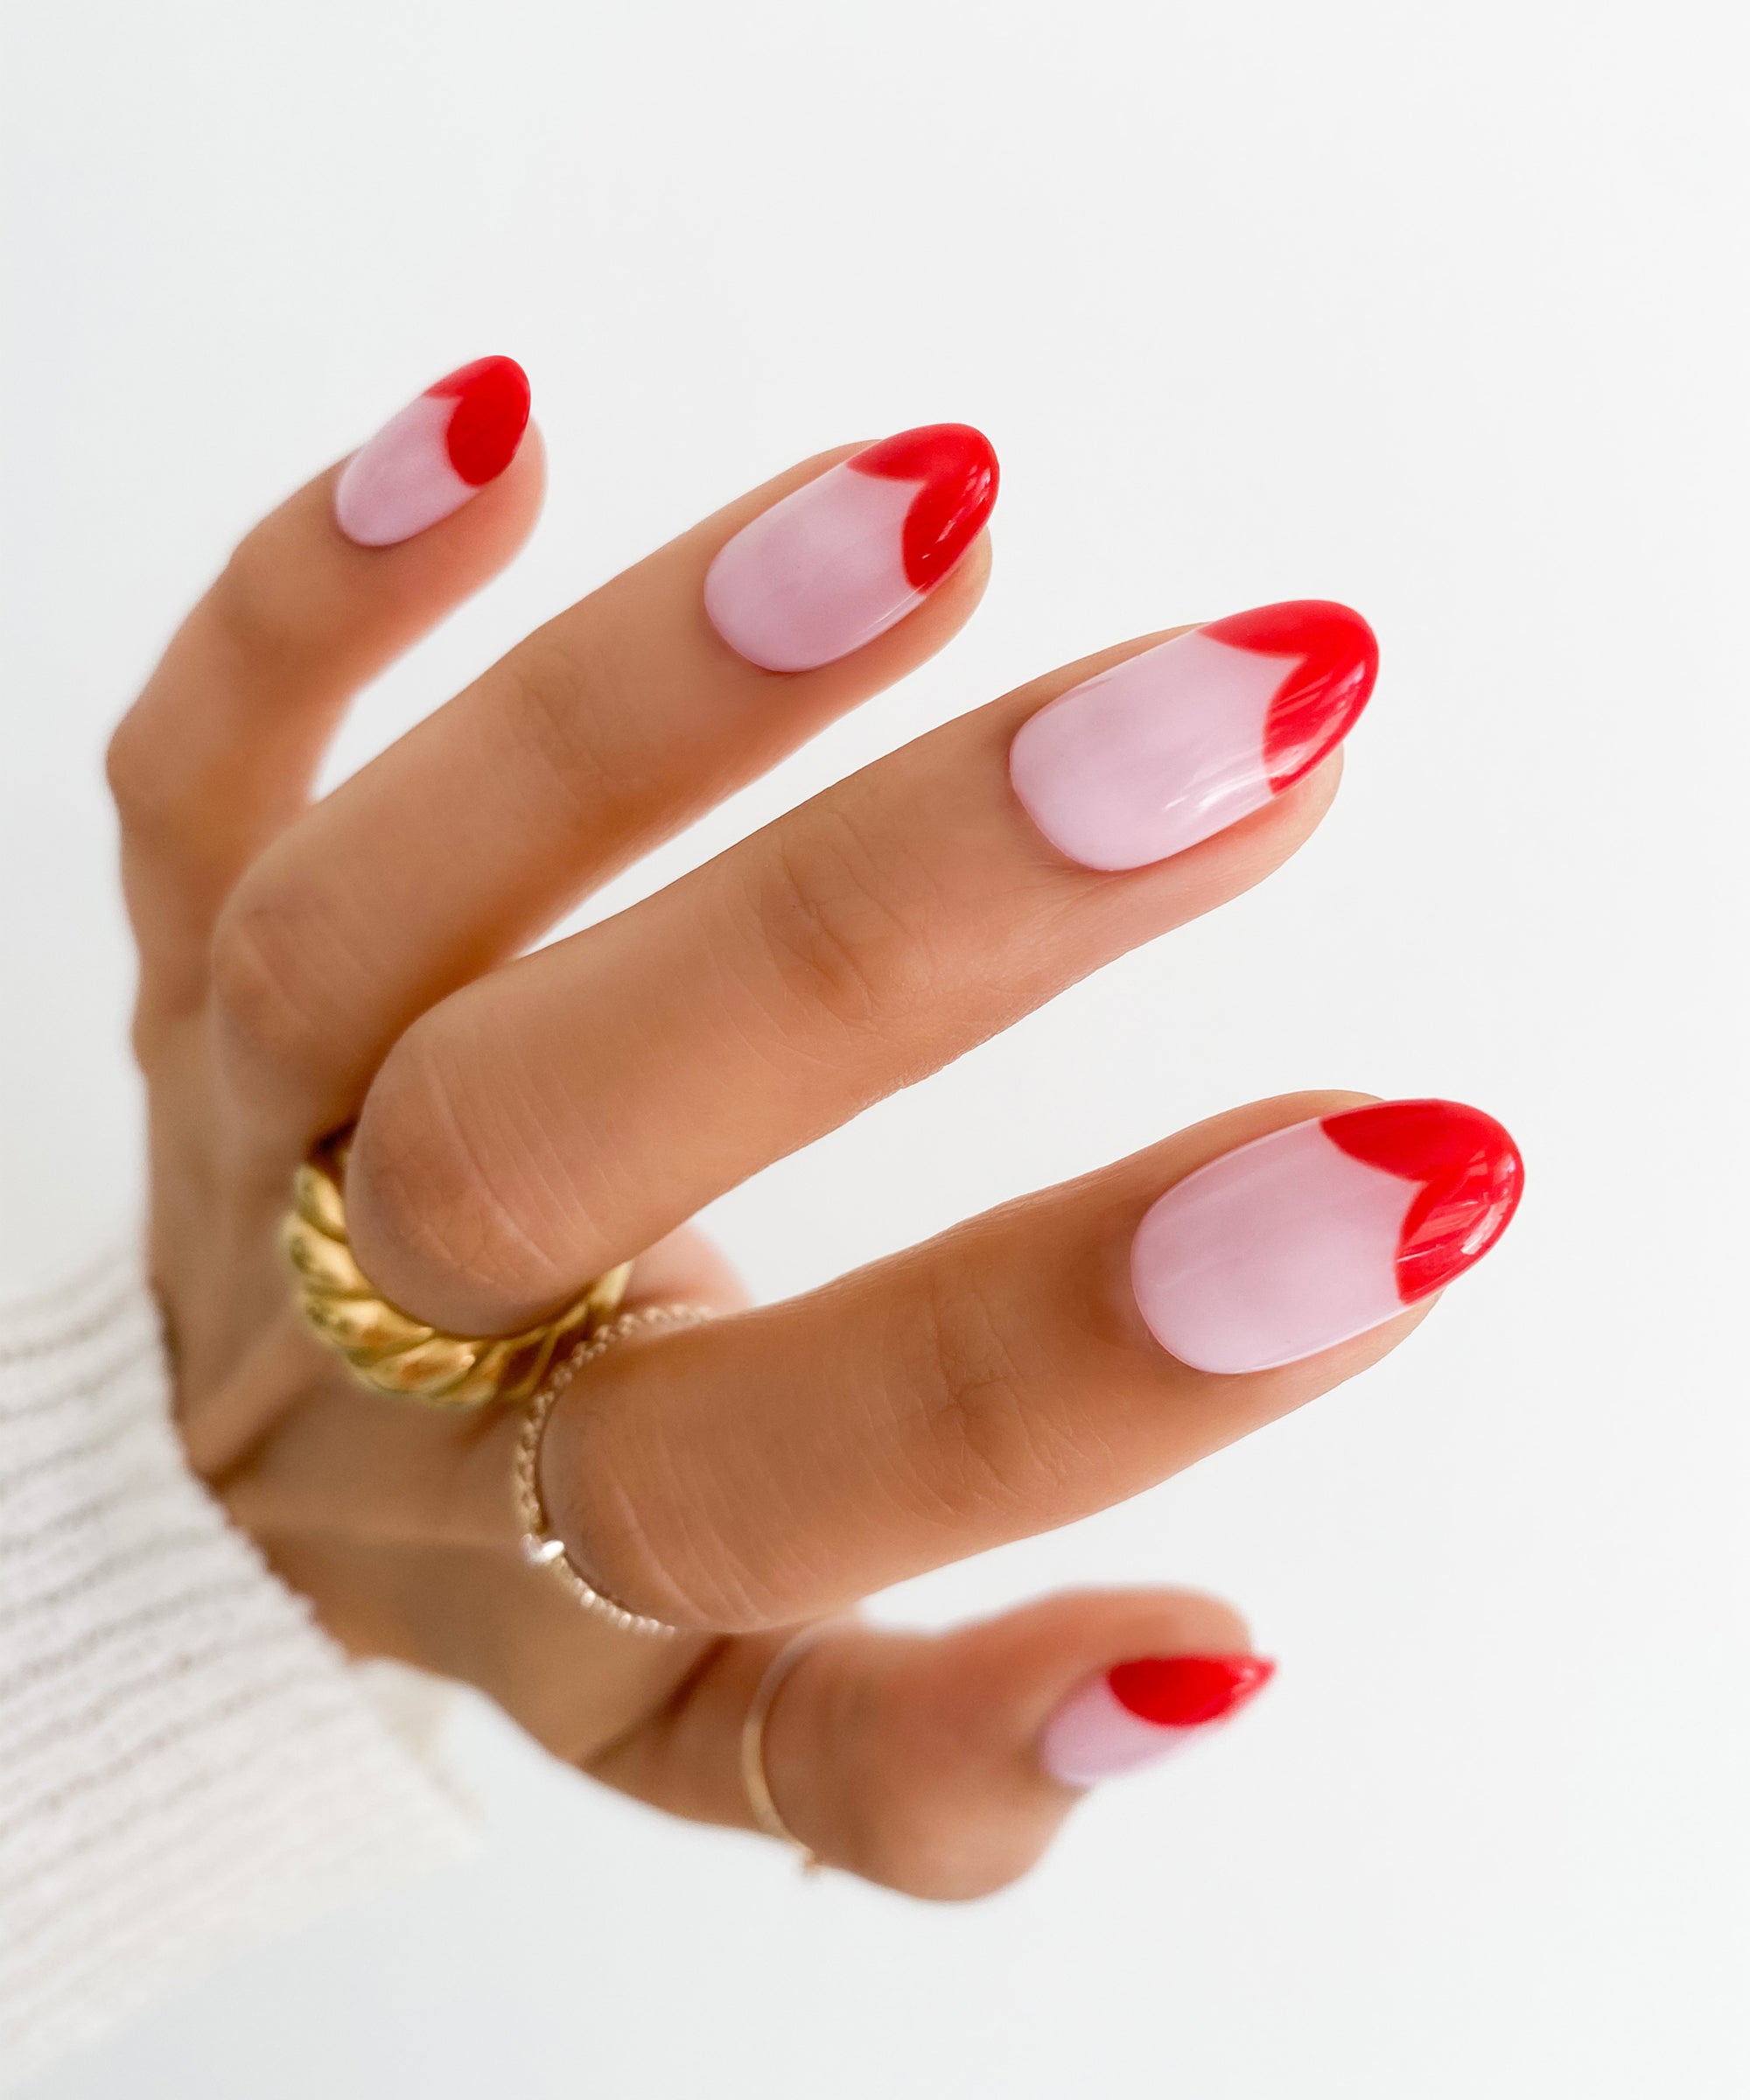 Heart-Tipped French Manicure Nail Art Trend For V-Day